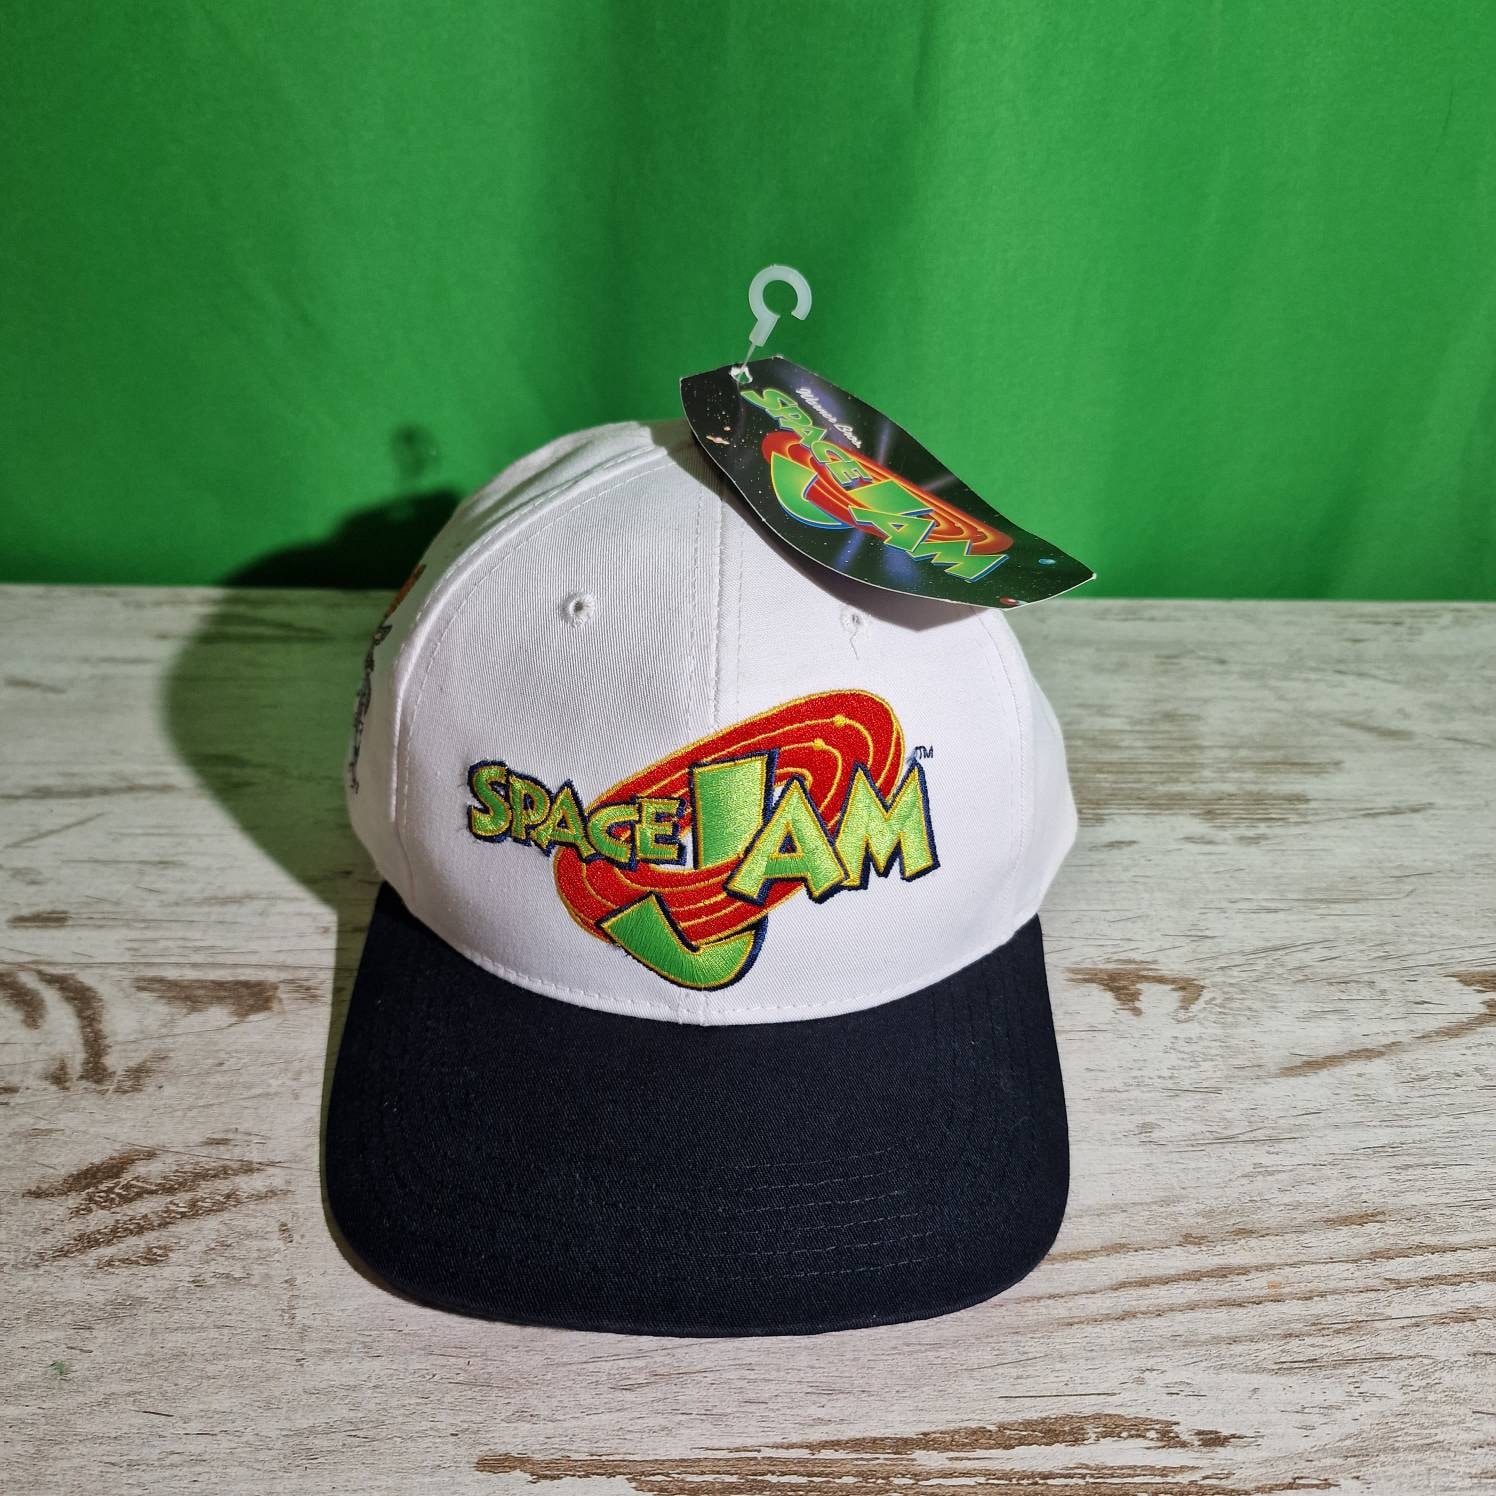  Mitchell & Ness X Space Jam 2 Snapback Hat Cap - White/Tune  Squad : Clothing, Shoes & Jewelry